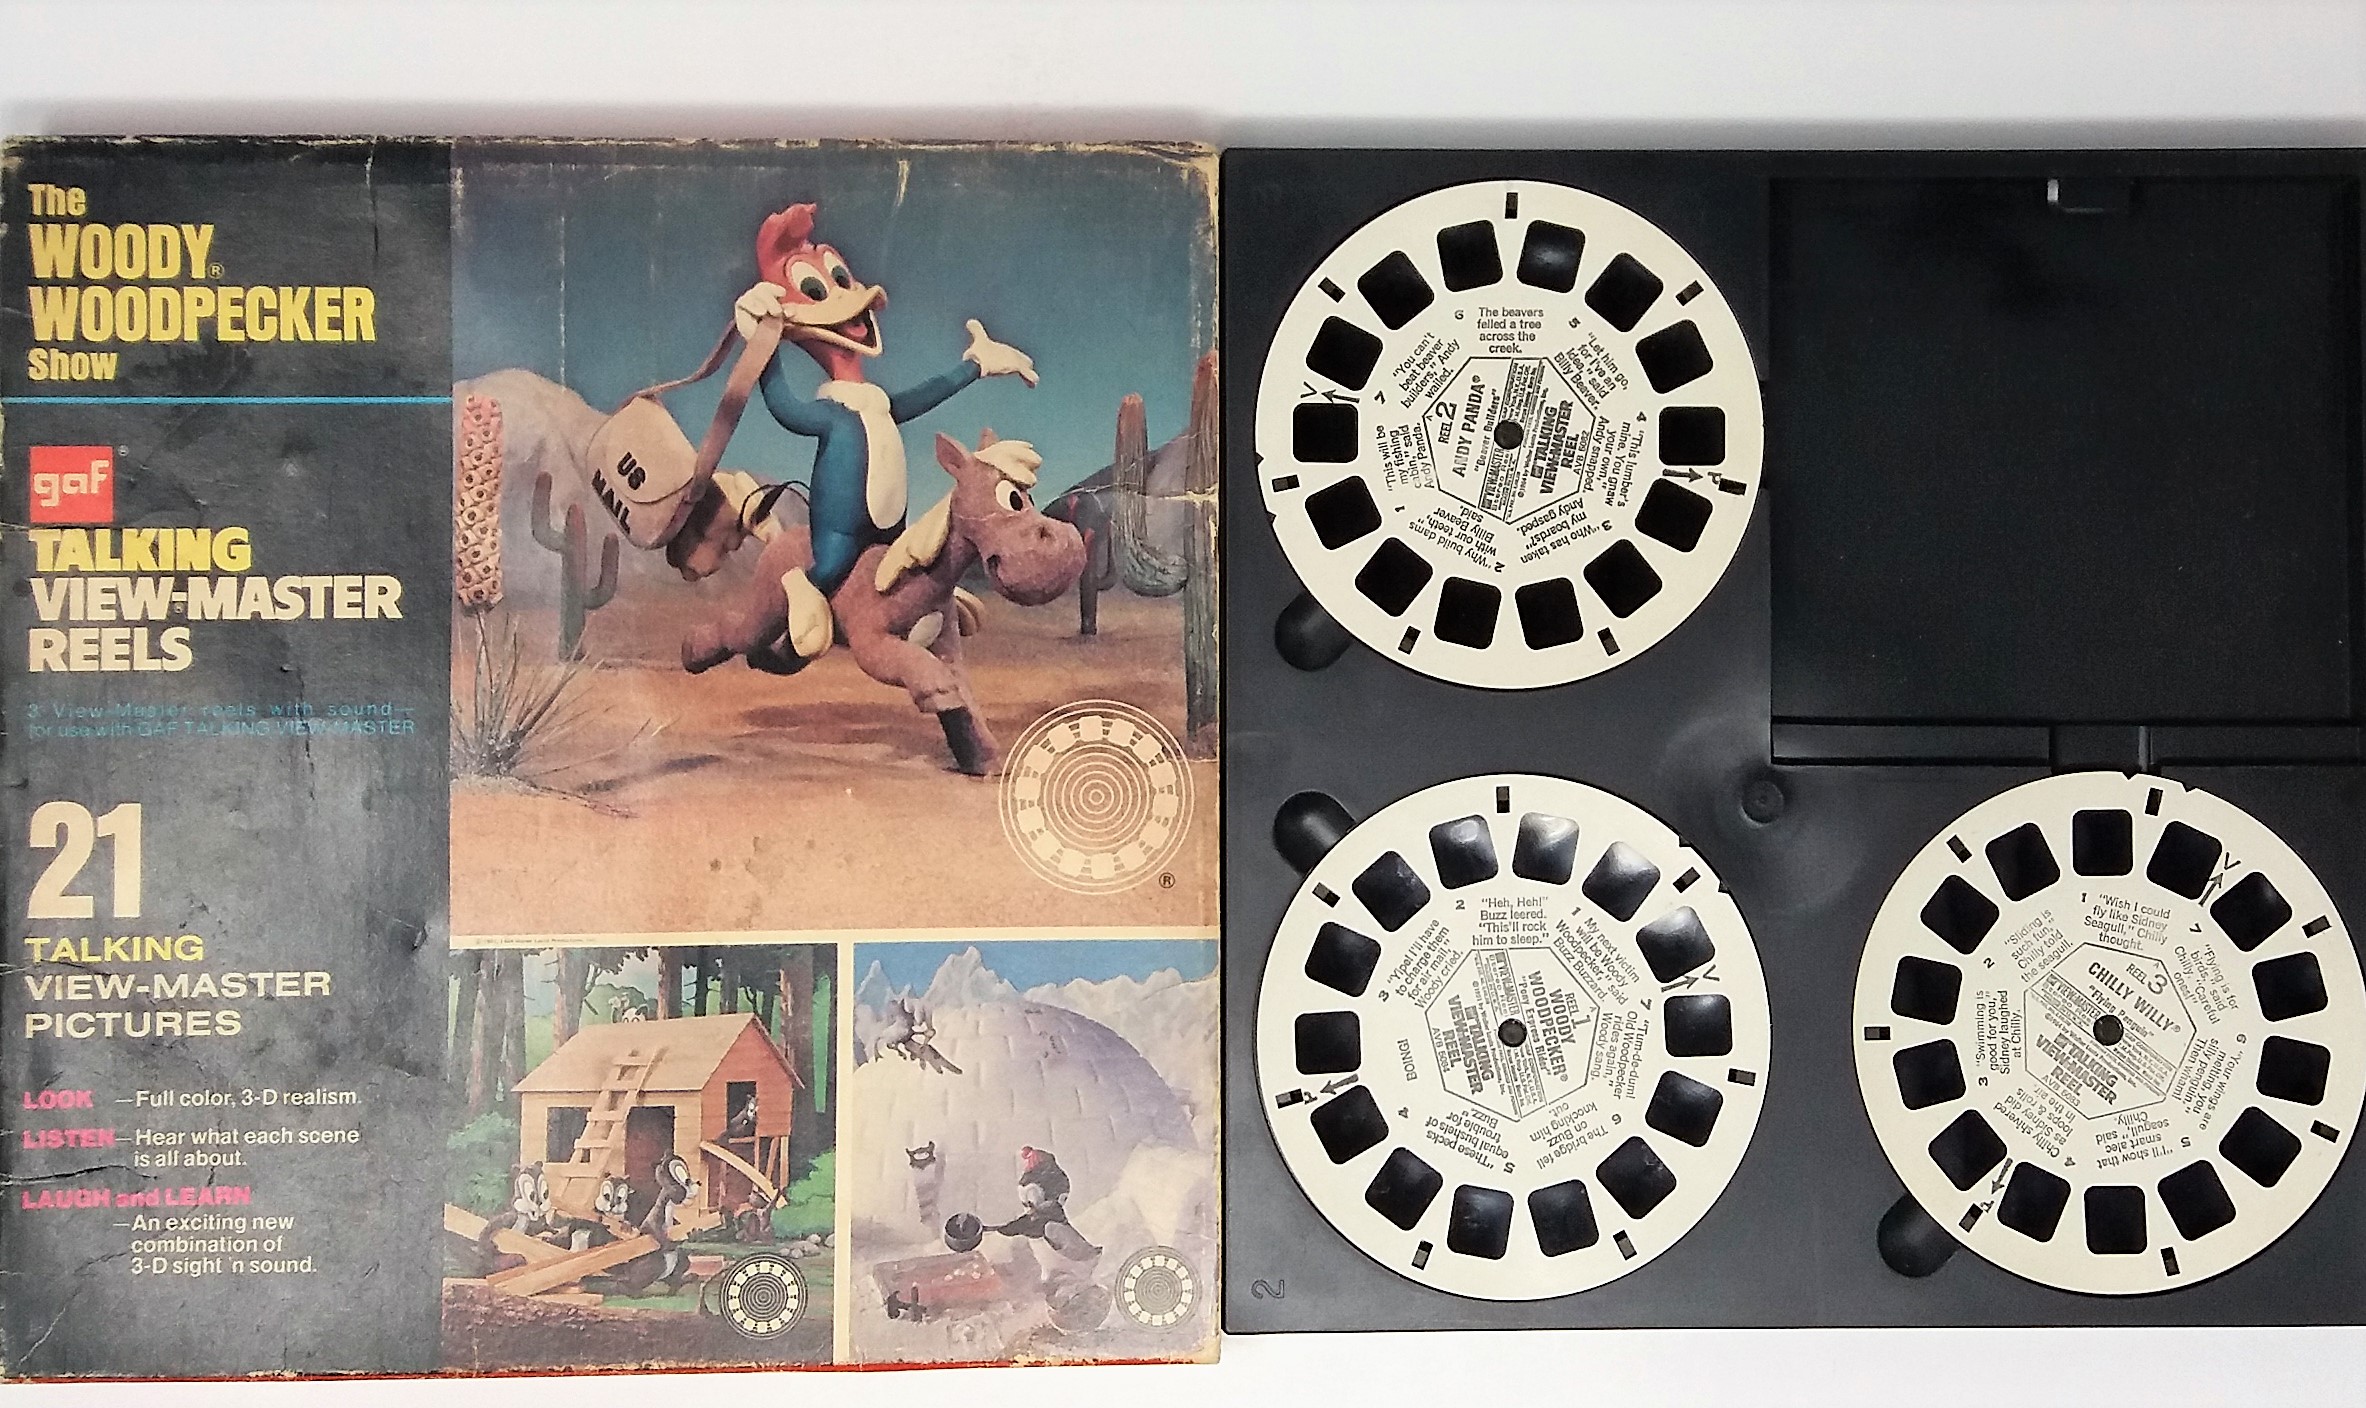 The Woody Woodpecker Show GAF Talking View-Master